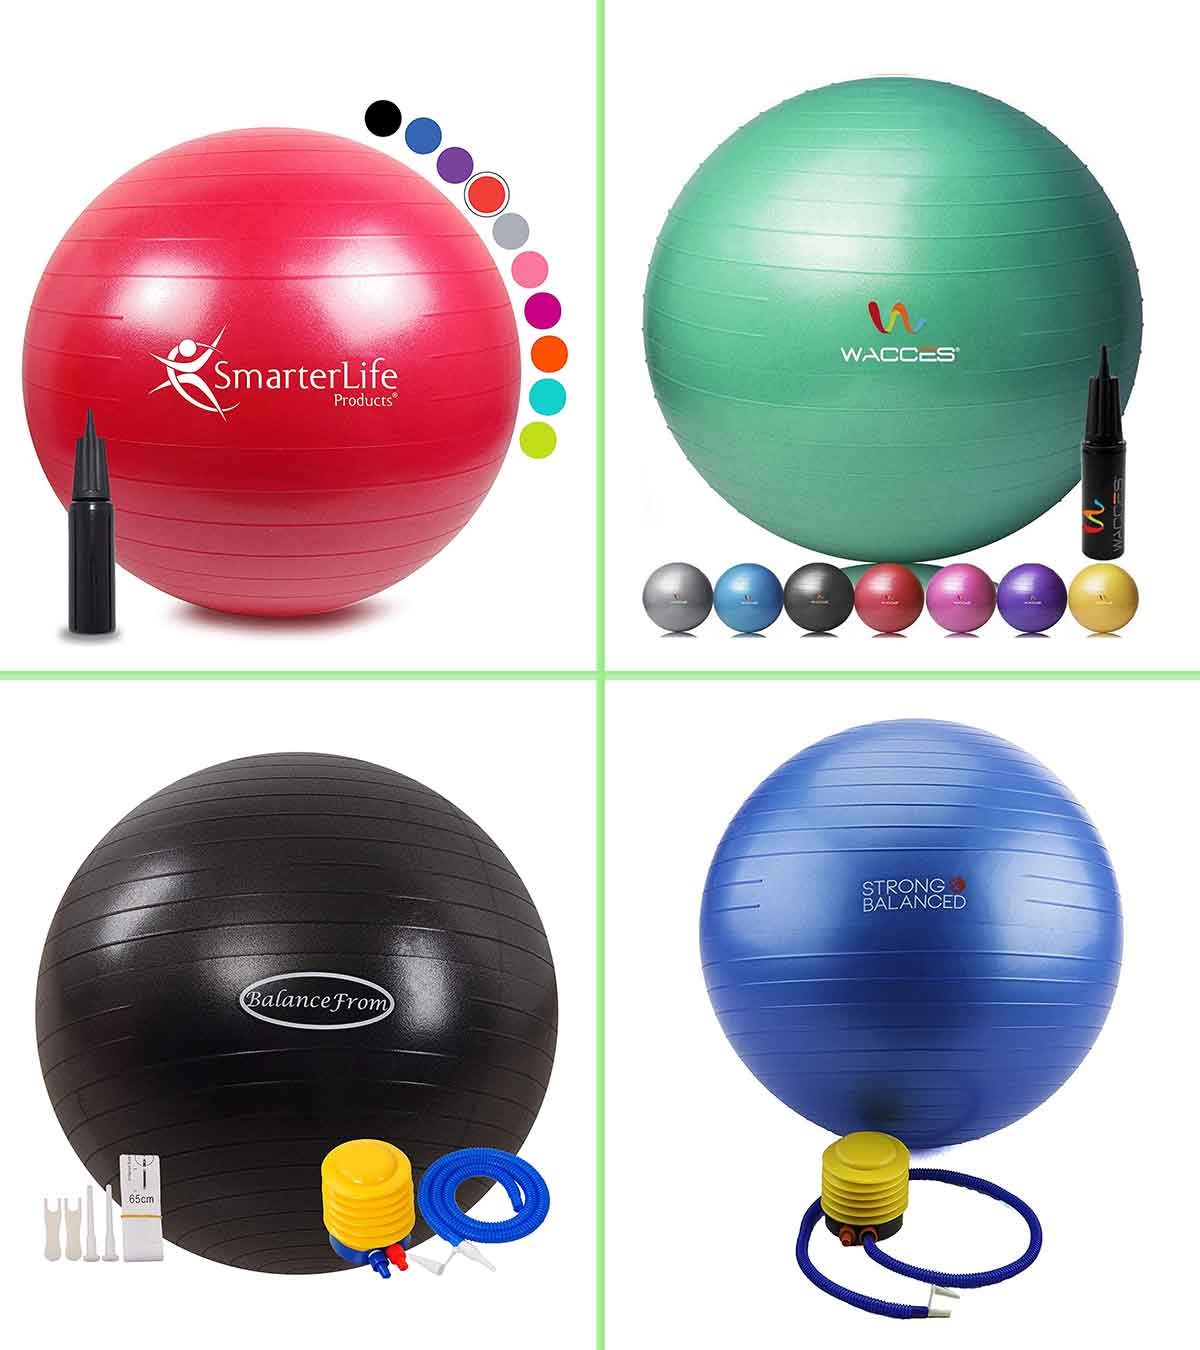 Balance & Gym Workouts- Anti Burst Black, 75 cm Wacces Professional Exercise Quick Pump Included Stability and Yoga Ball for Fitness